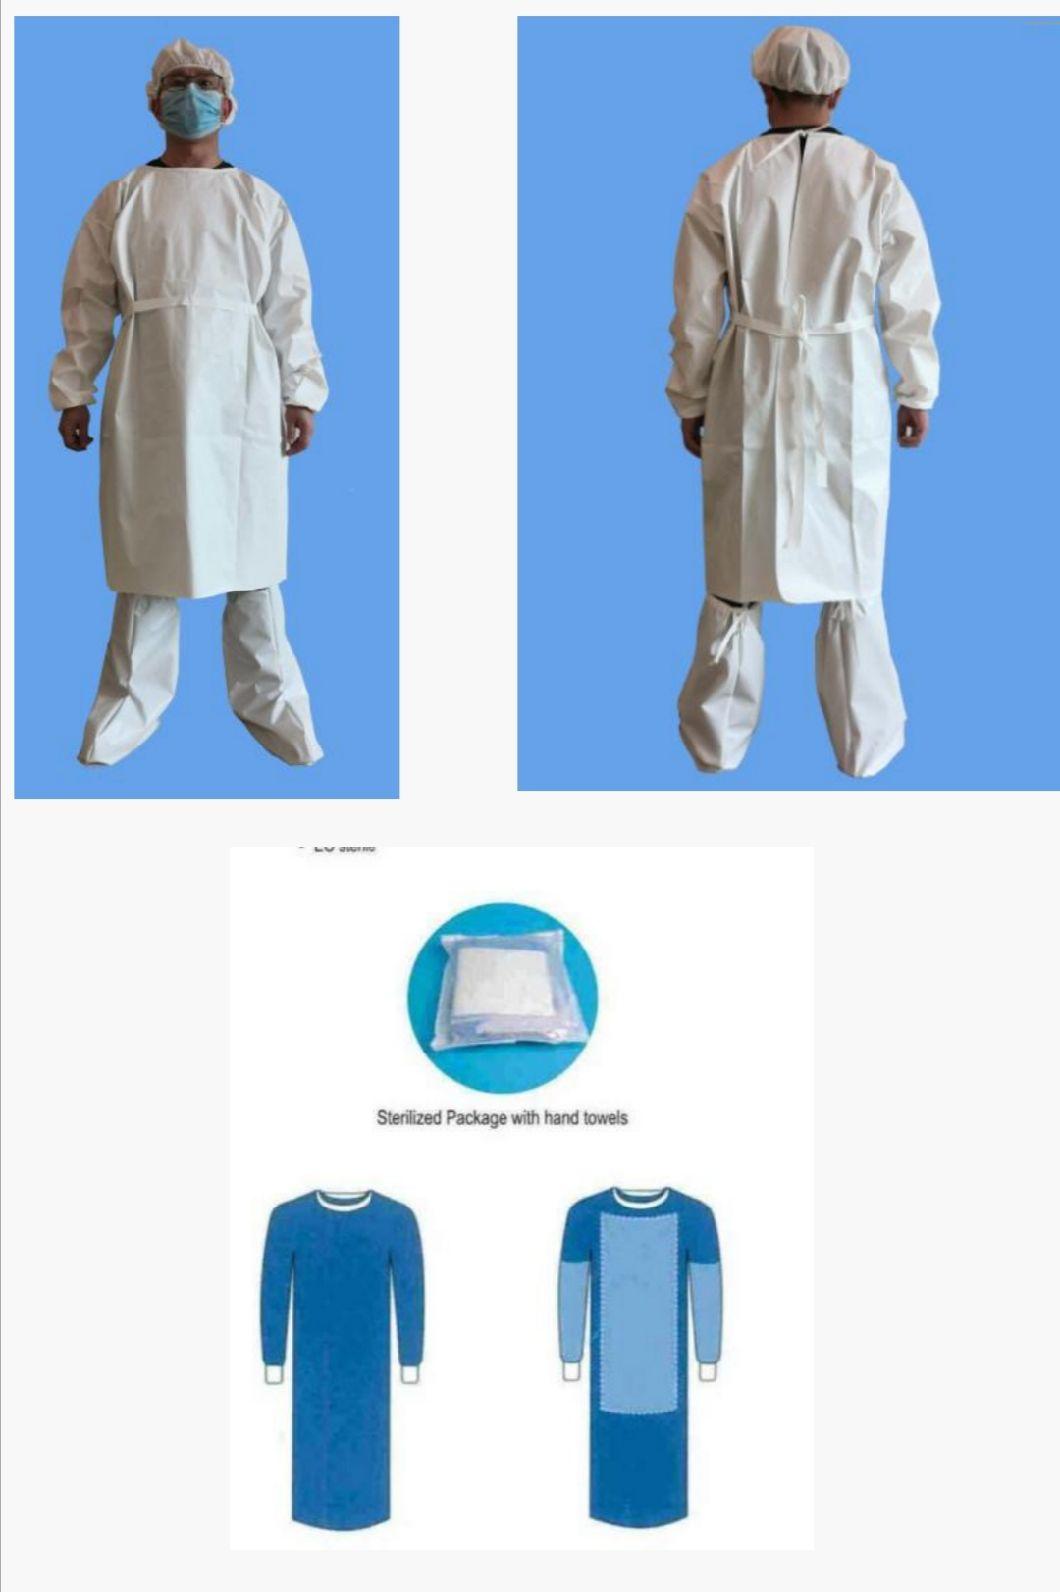 AAMI PB70 Level 4 Surgical Gown FDA 510K Gown Surgical Operating Gown Sterile Disposable Reinforced Non-Woven Surgical Gown